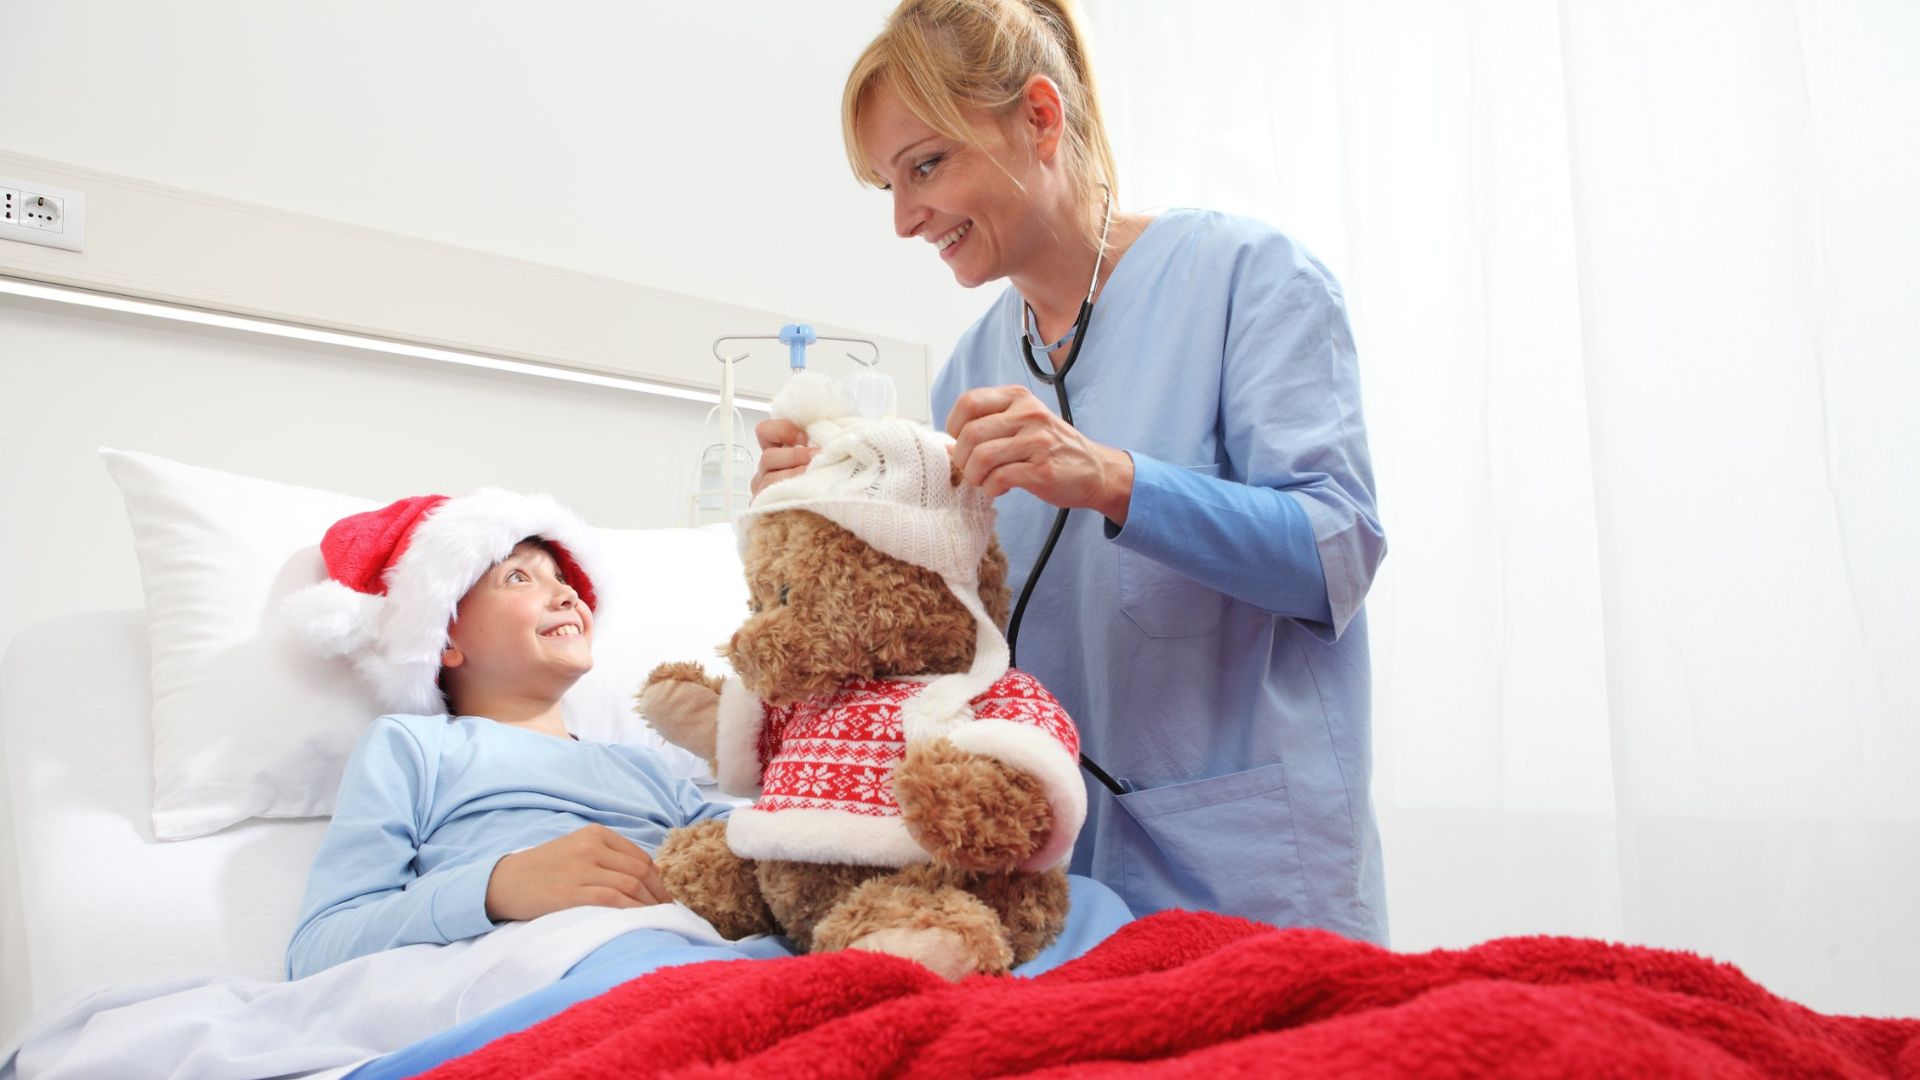 a nurse smiles taking care of a smiling child patient in the hospital room by bringing in a holiday themed teddy bear